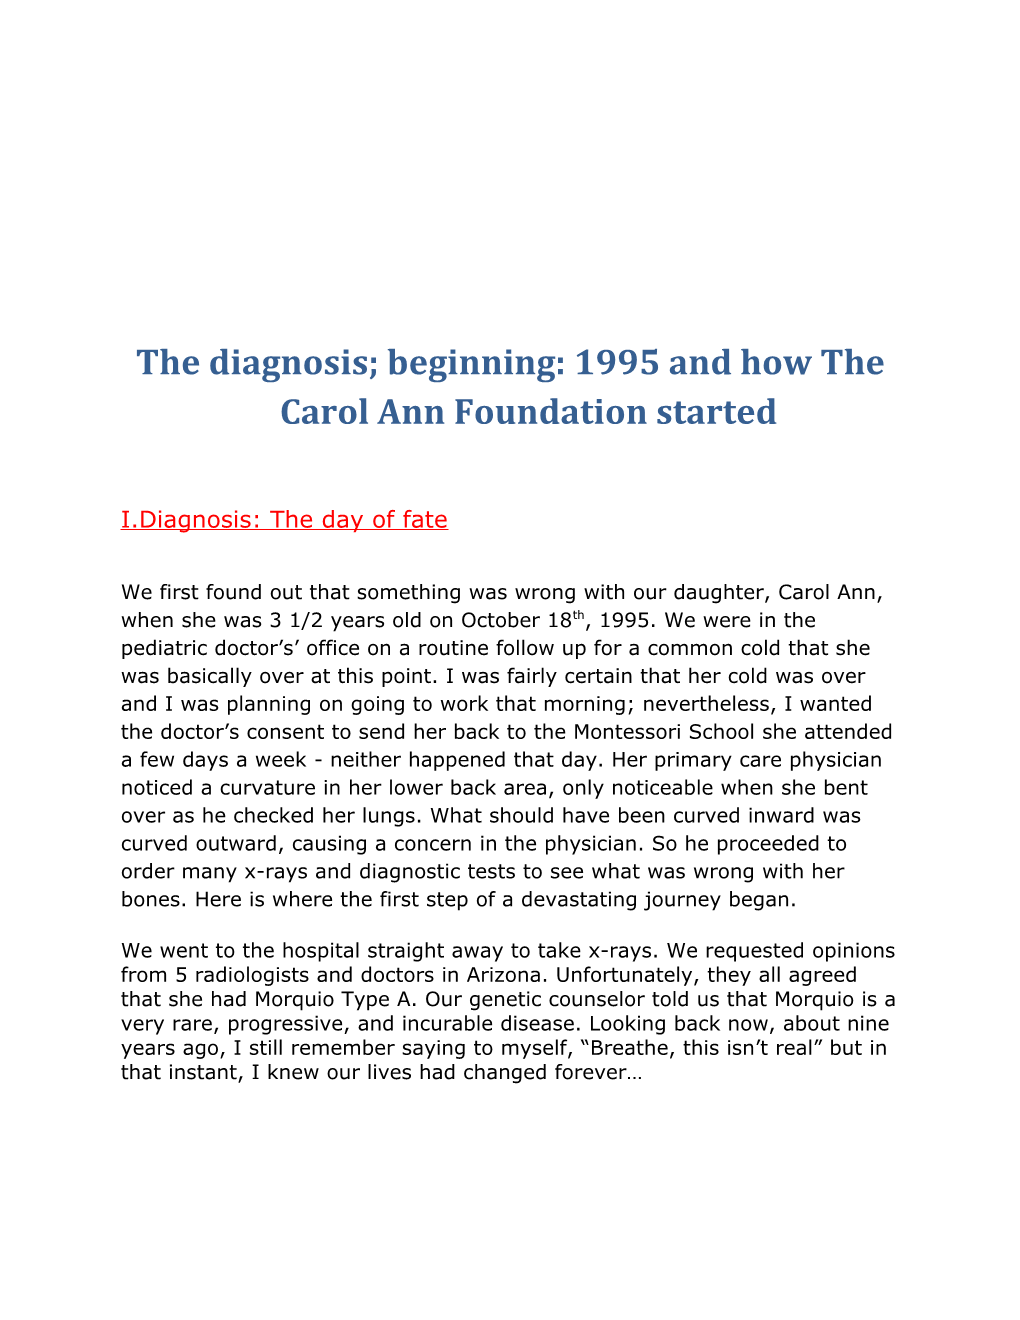 The Diagnosis; Beginning: 1995 and How the Carol Ann Foundation Started